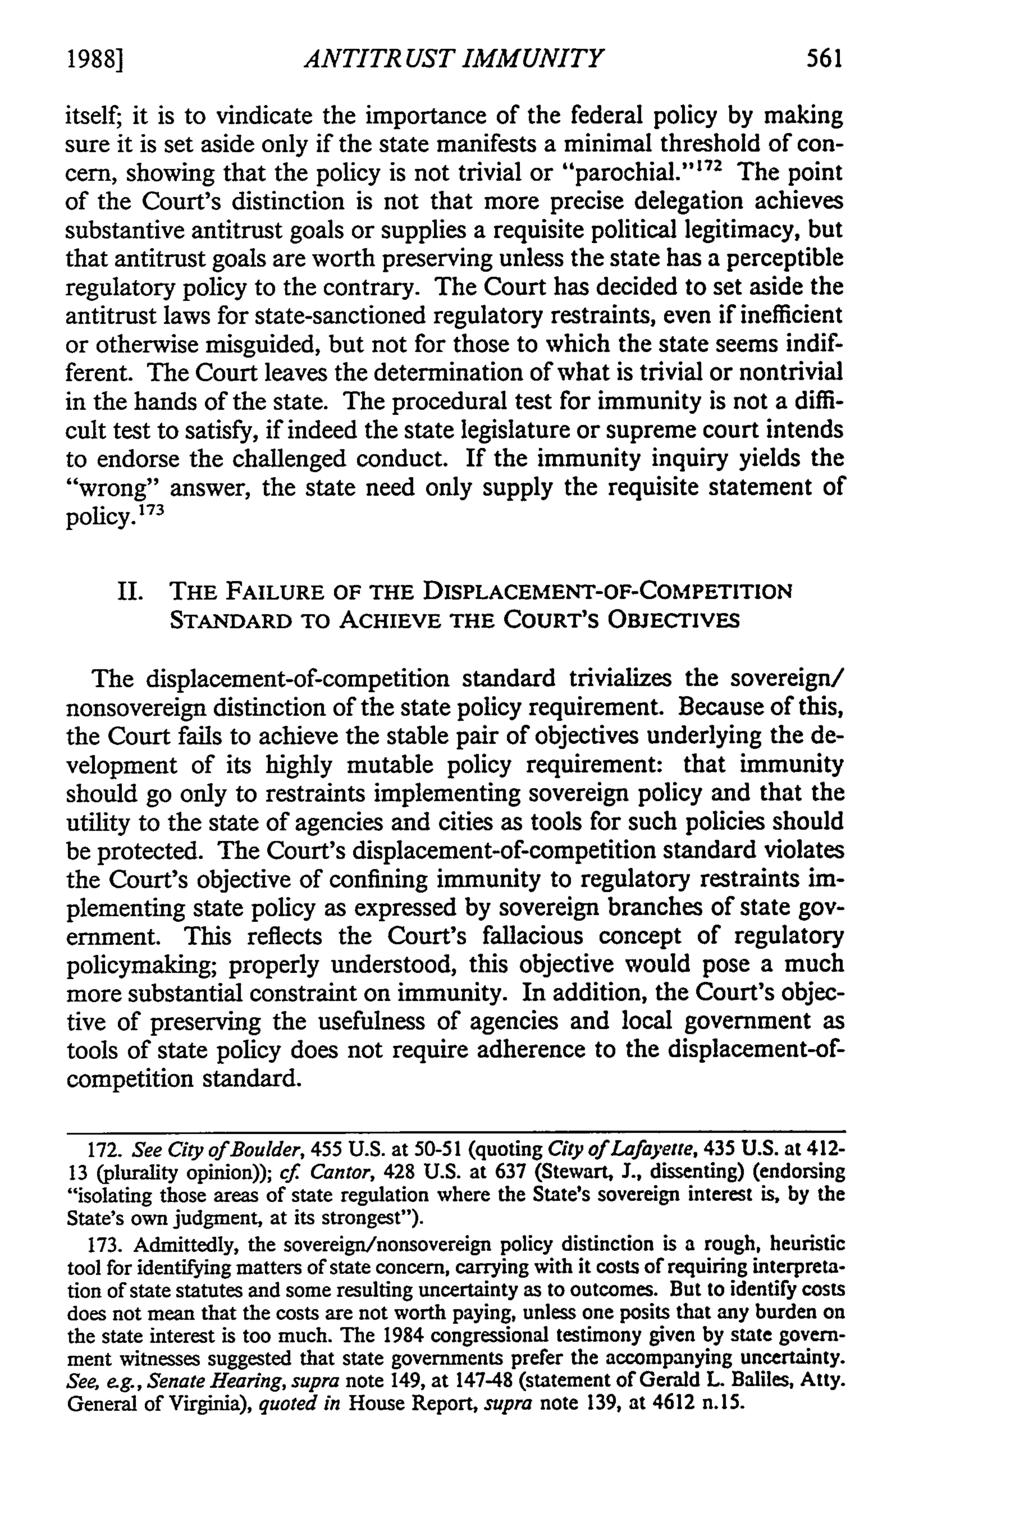 1988] ANTITRUST IMMUNITY itself; it is to vindicate the importance of the federal policy by making sure it is set aside only if the state manifests a minimal threshold of concern, showing that the